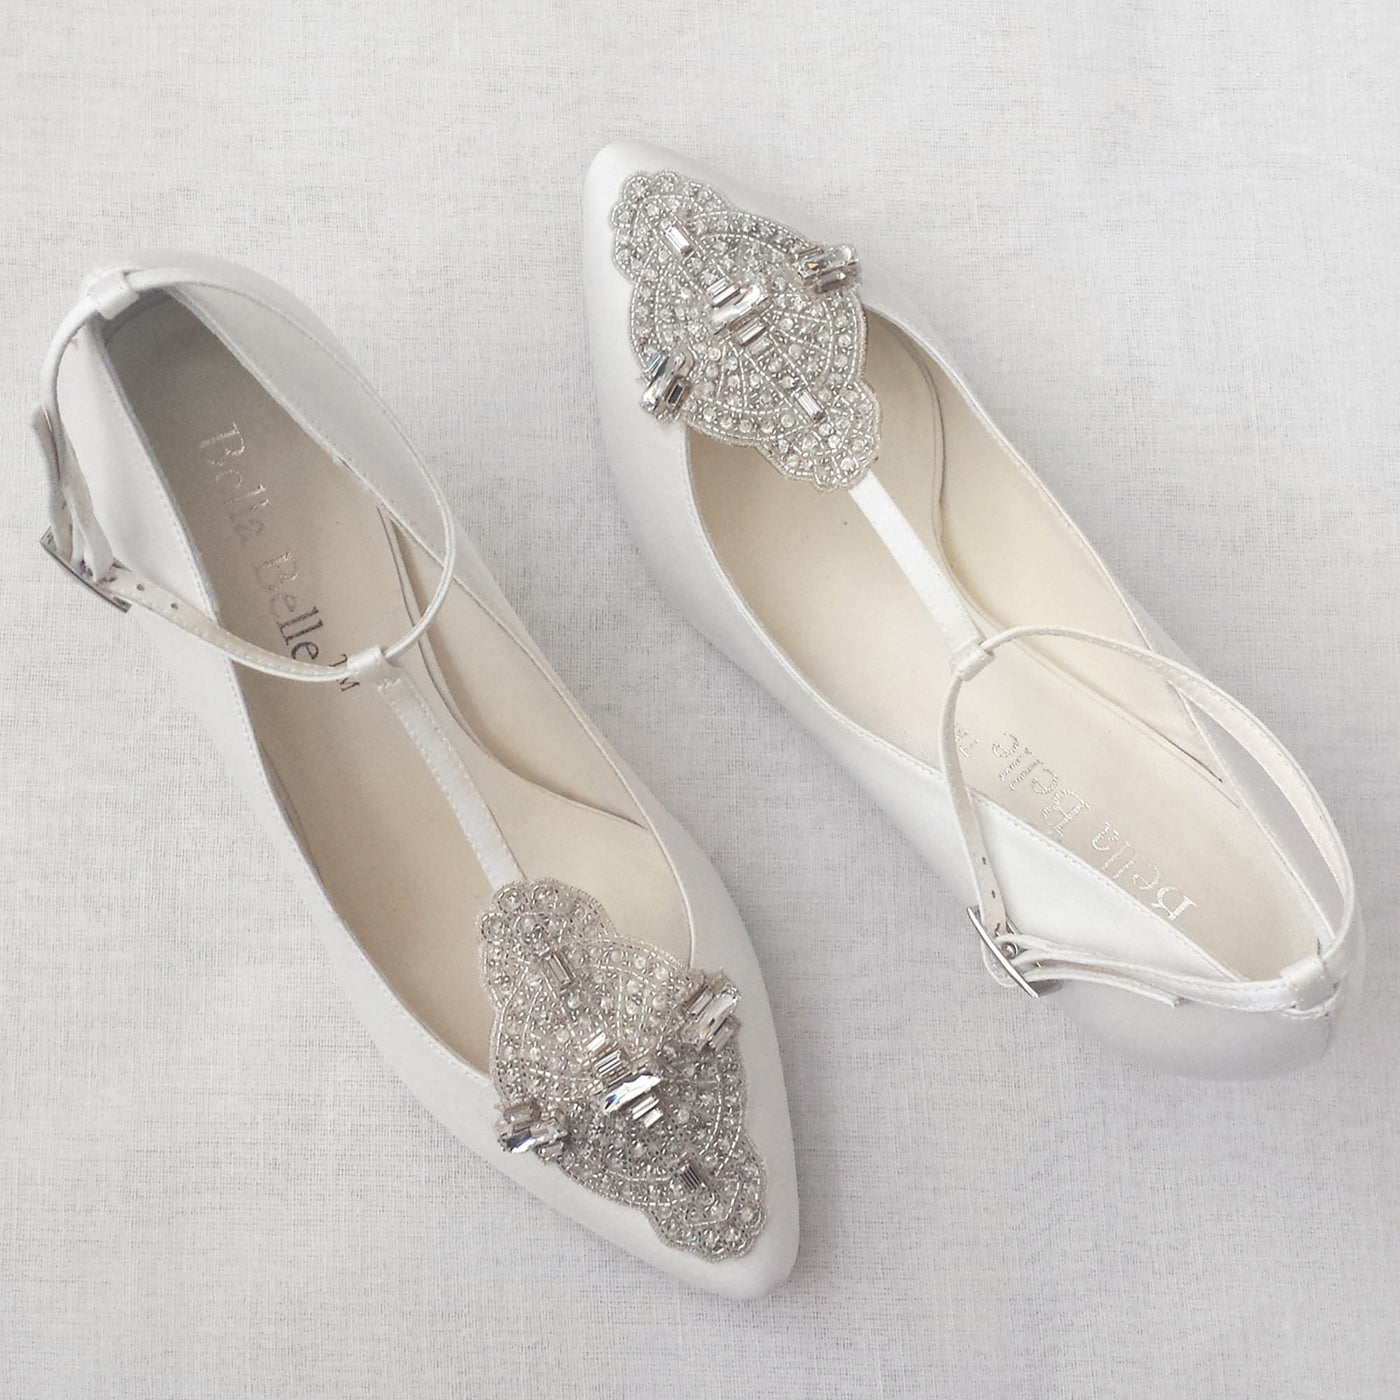 Art Deco Wedding Shoes Annalise - SOLD OUT